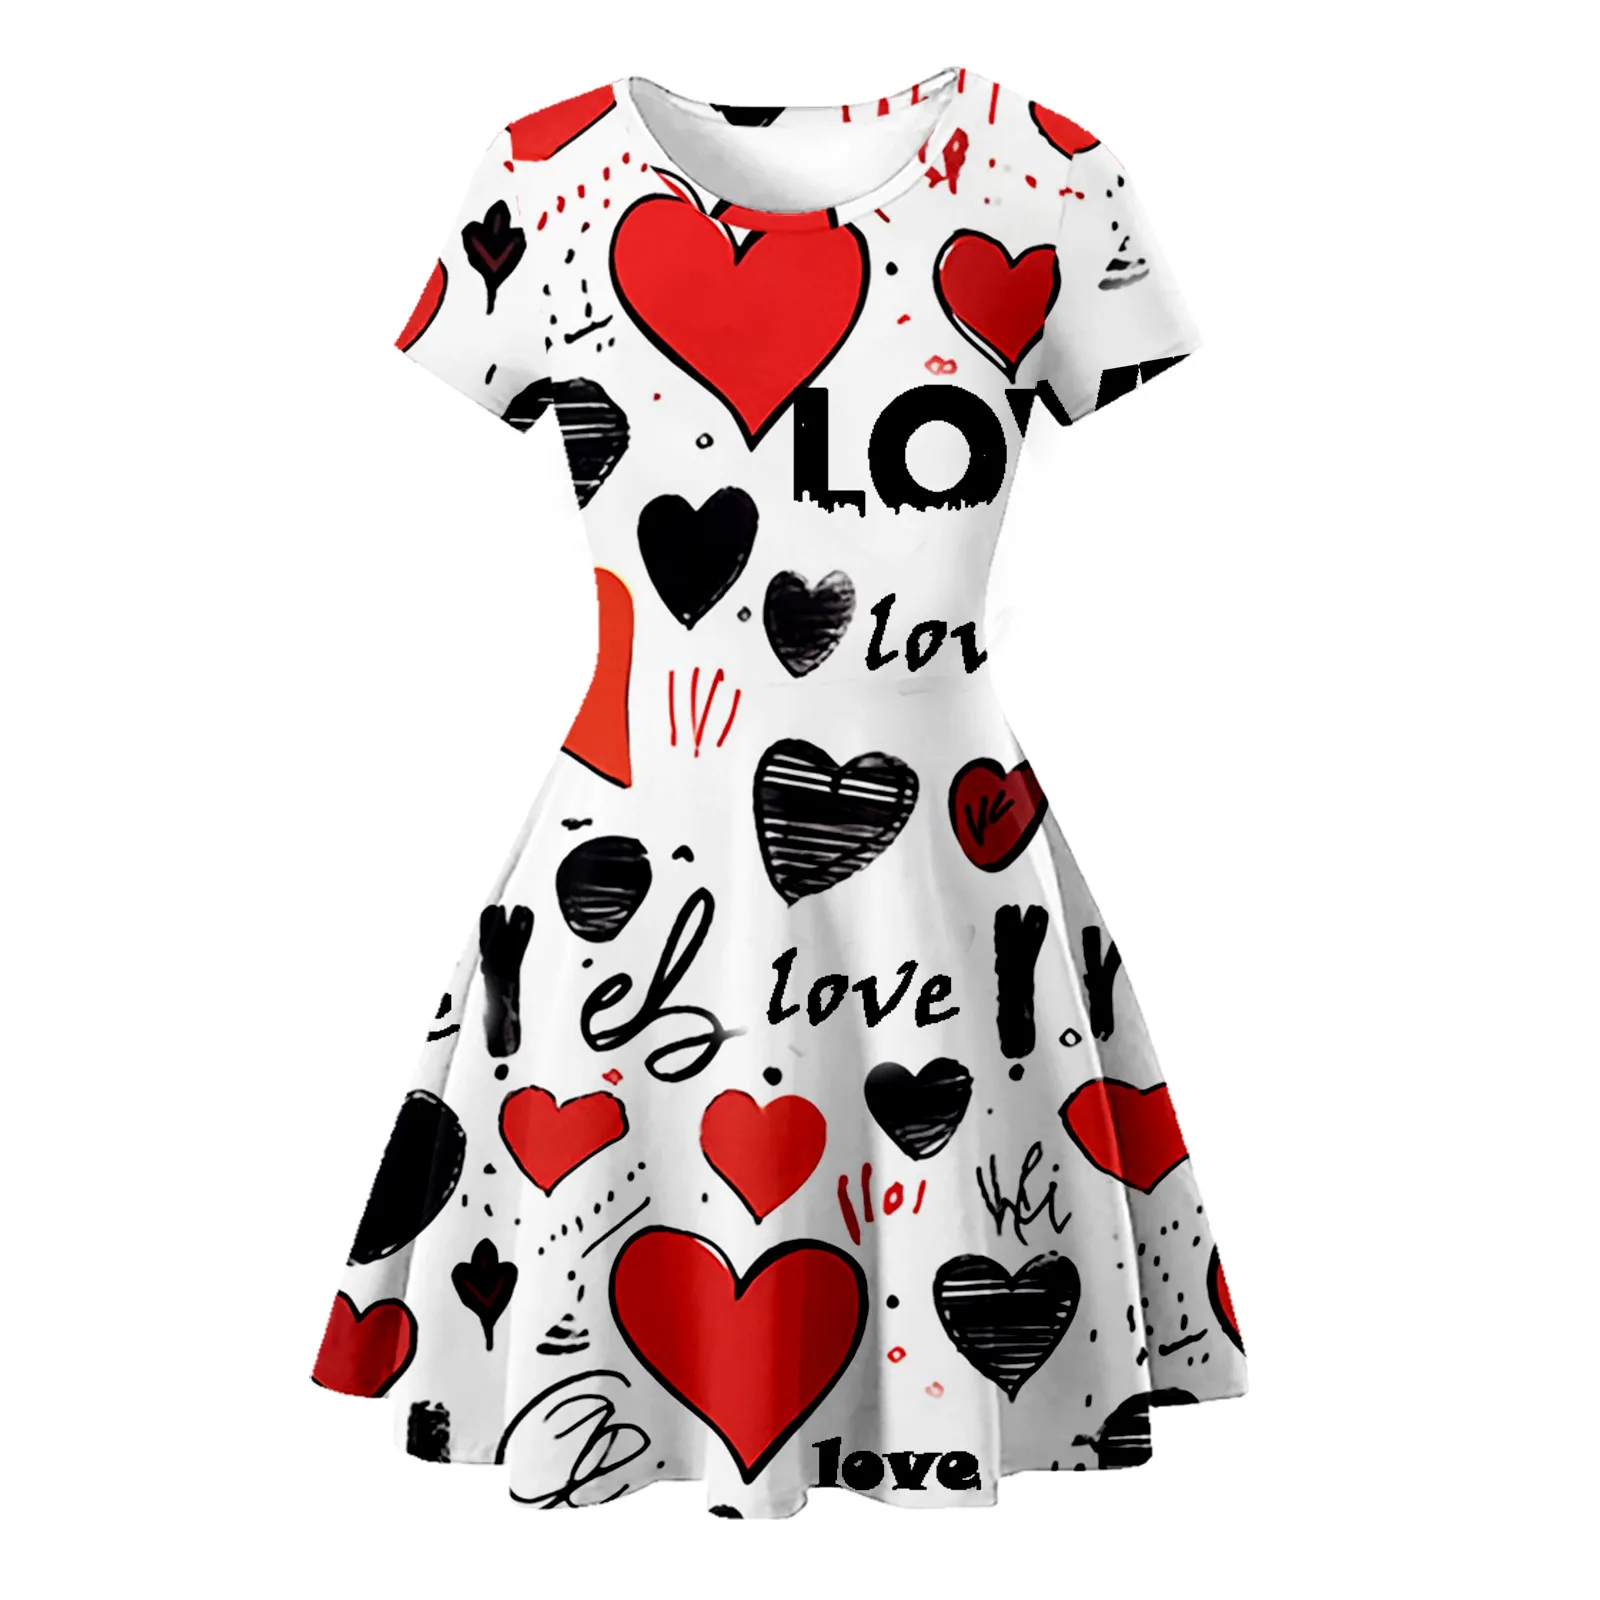 

Toddler Girls Valentine's Day Printed Dress Summer Short Sleeve Prints Princess Dress Kids Girls Party Dresses Clothes For 1-9Y